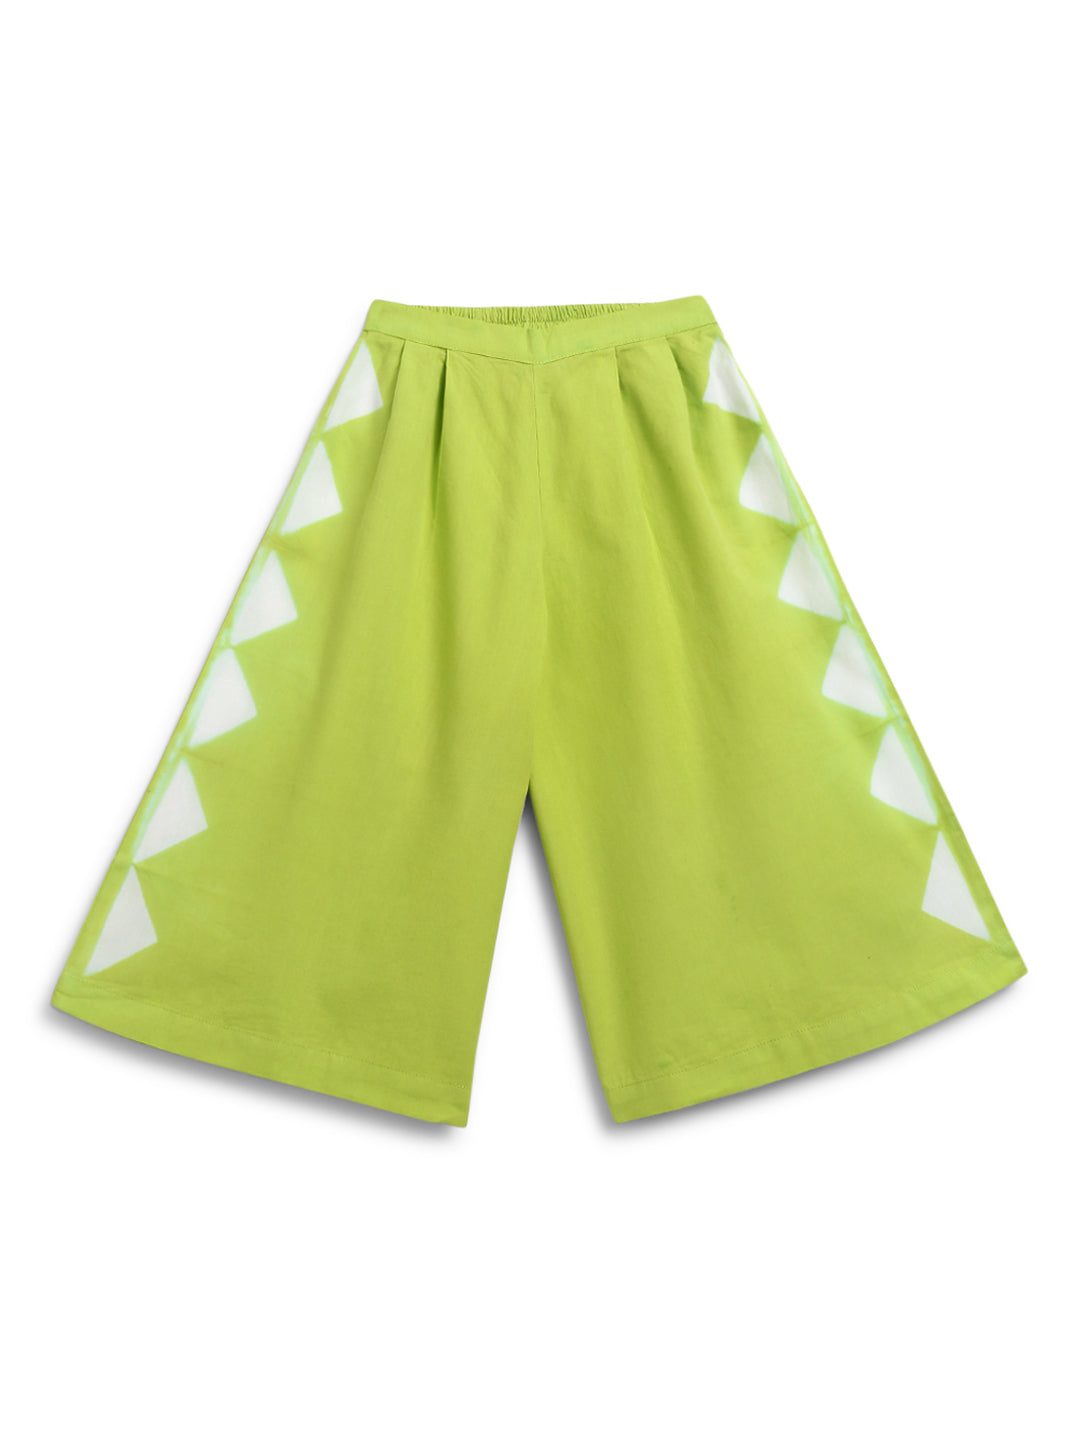 Twisty Triangle Girl Coord Set - Green